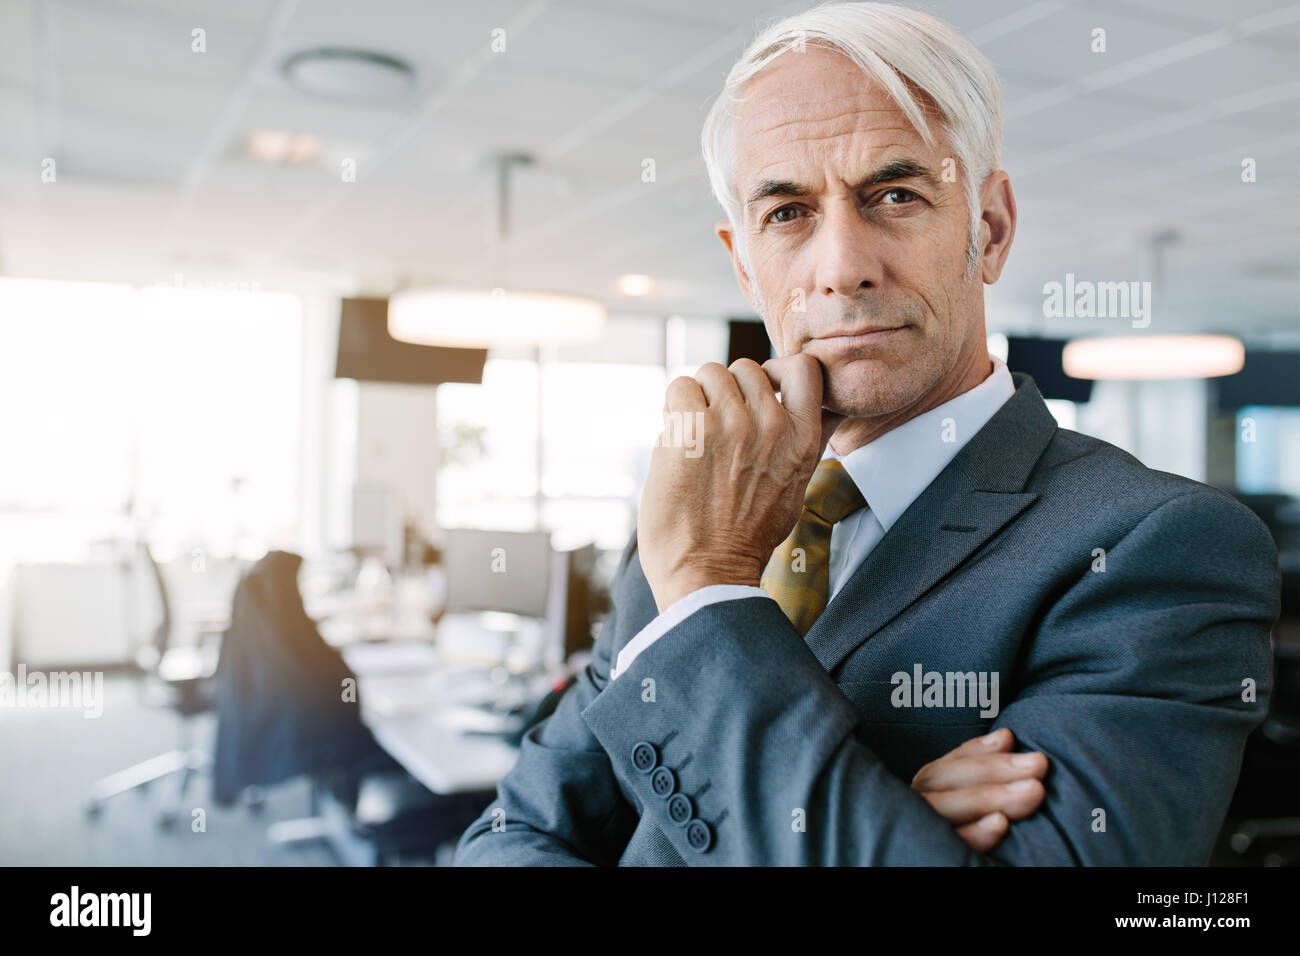 Portrait of mature businessman standing in office and staring at camera. Thoughtful senior professional with hand on chin. Stock Photo